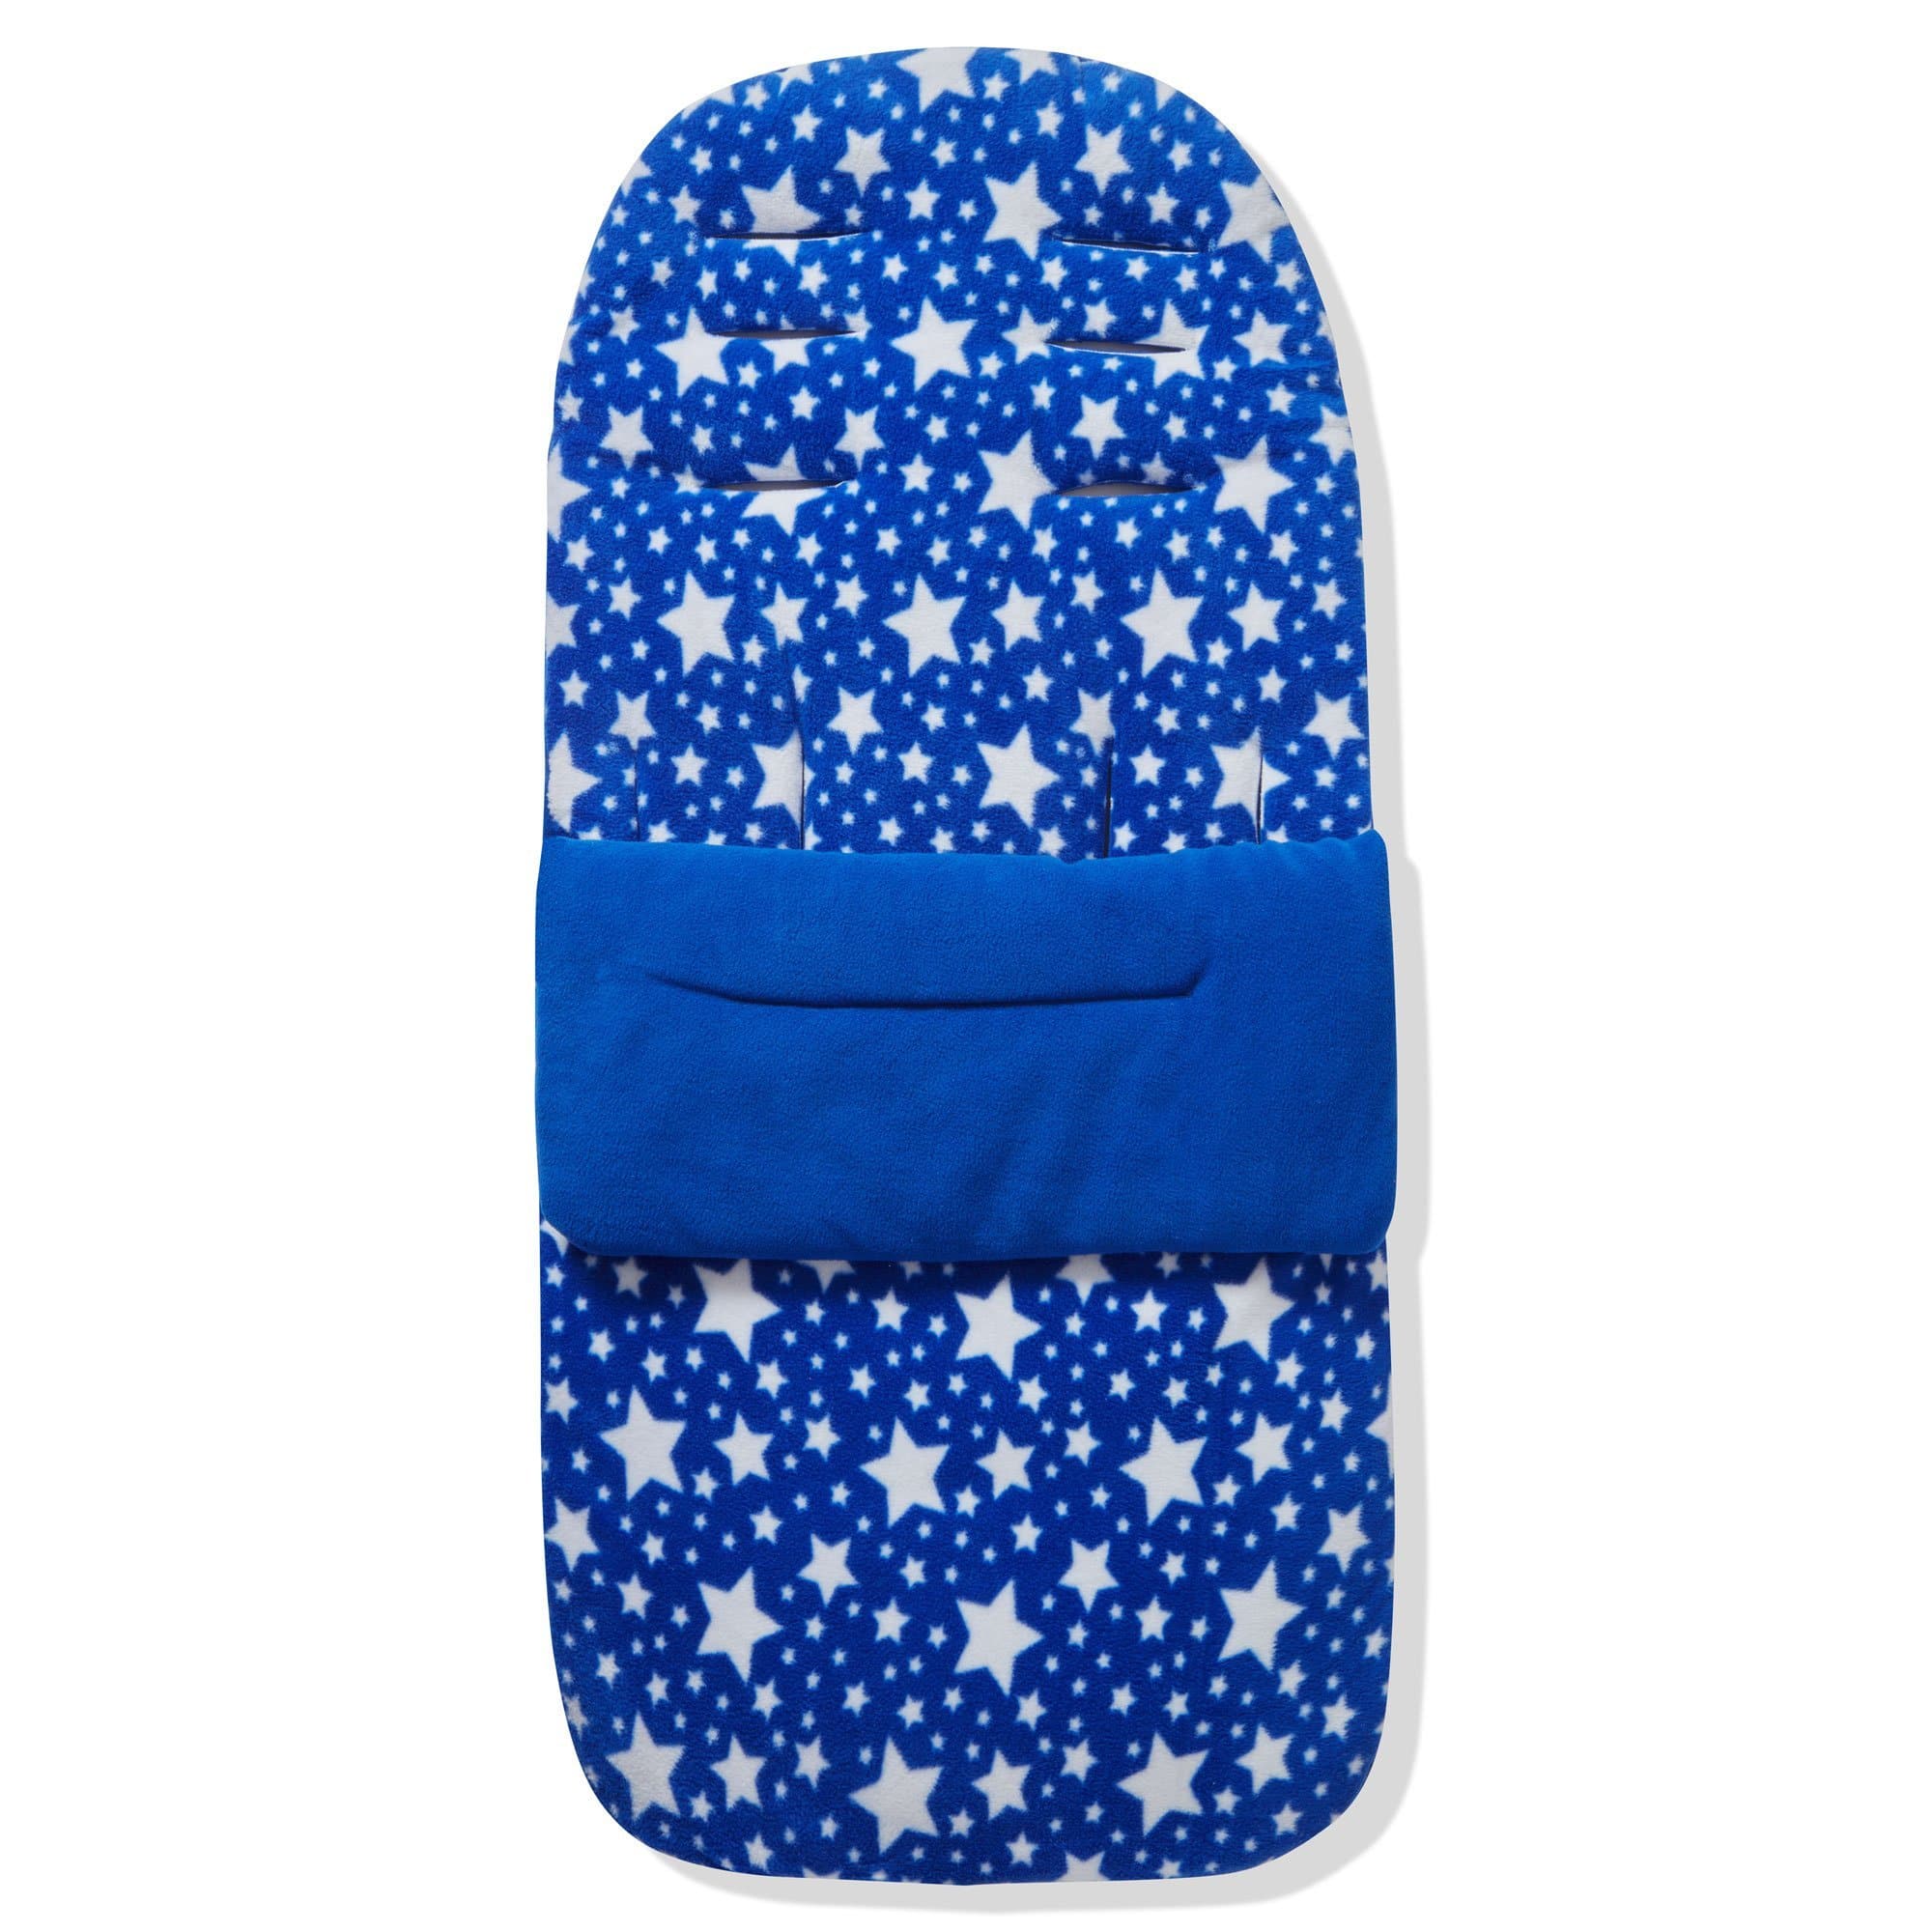 Fleece Footmuff / Cosy Toes Compatible With Concord - Blue Star / Fits All Models | For Your Little One